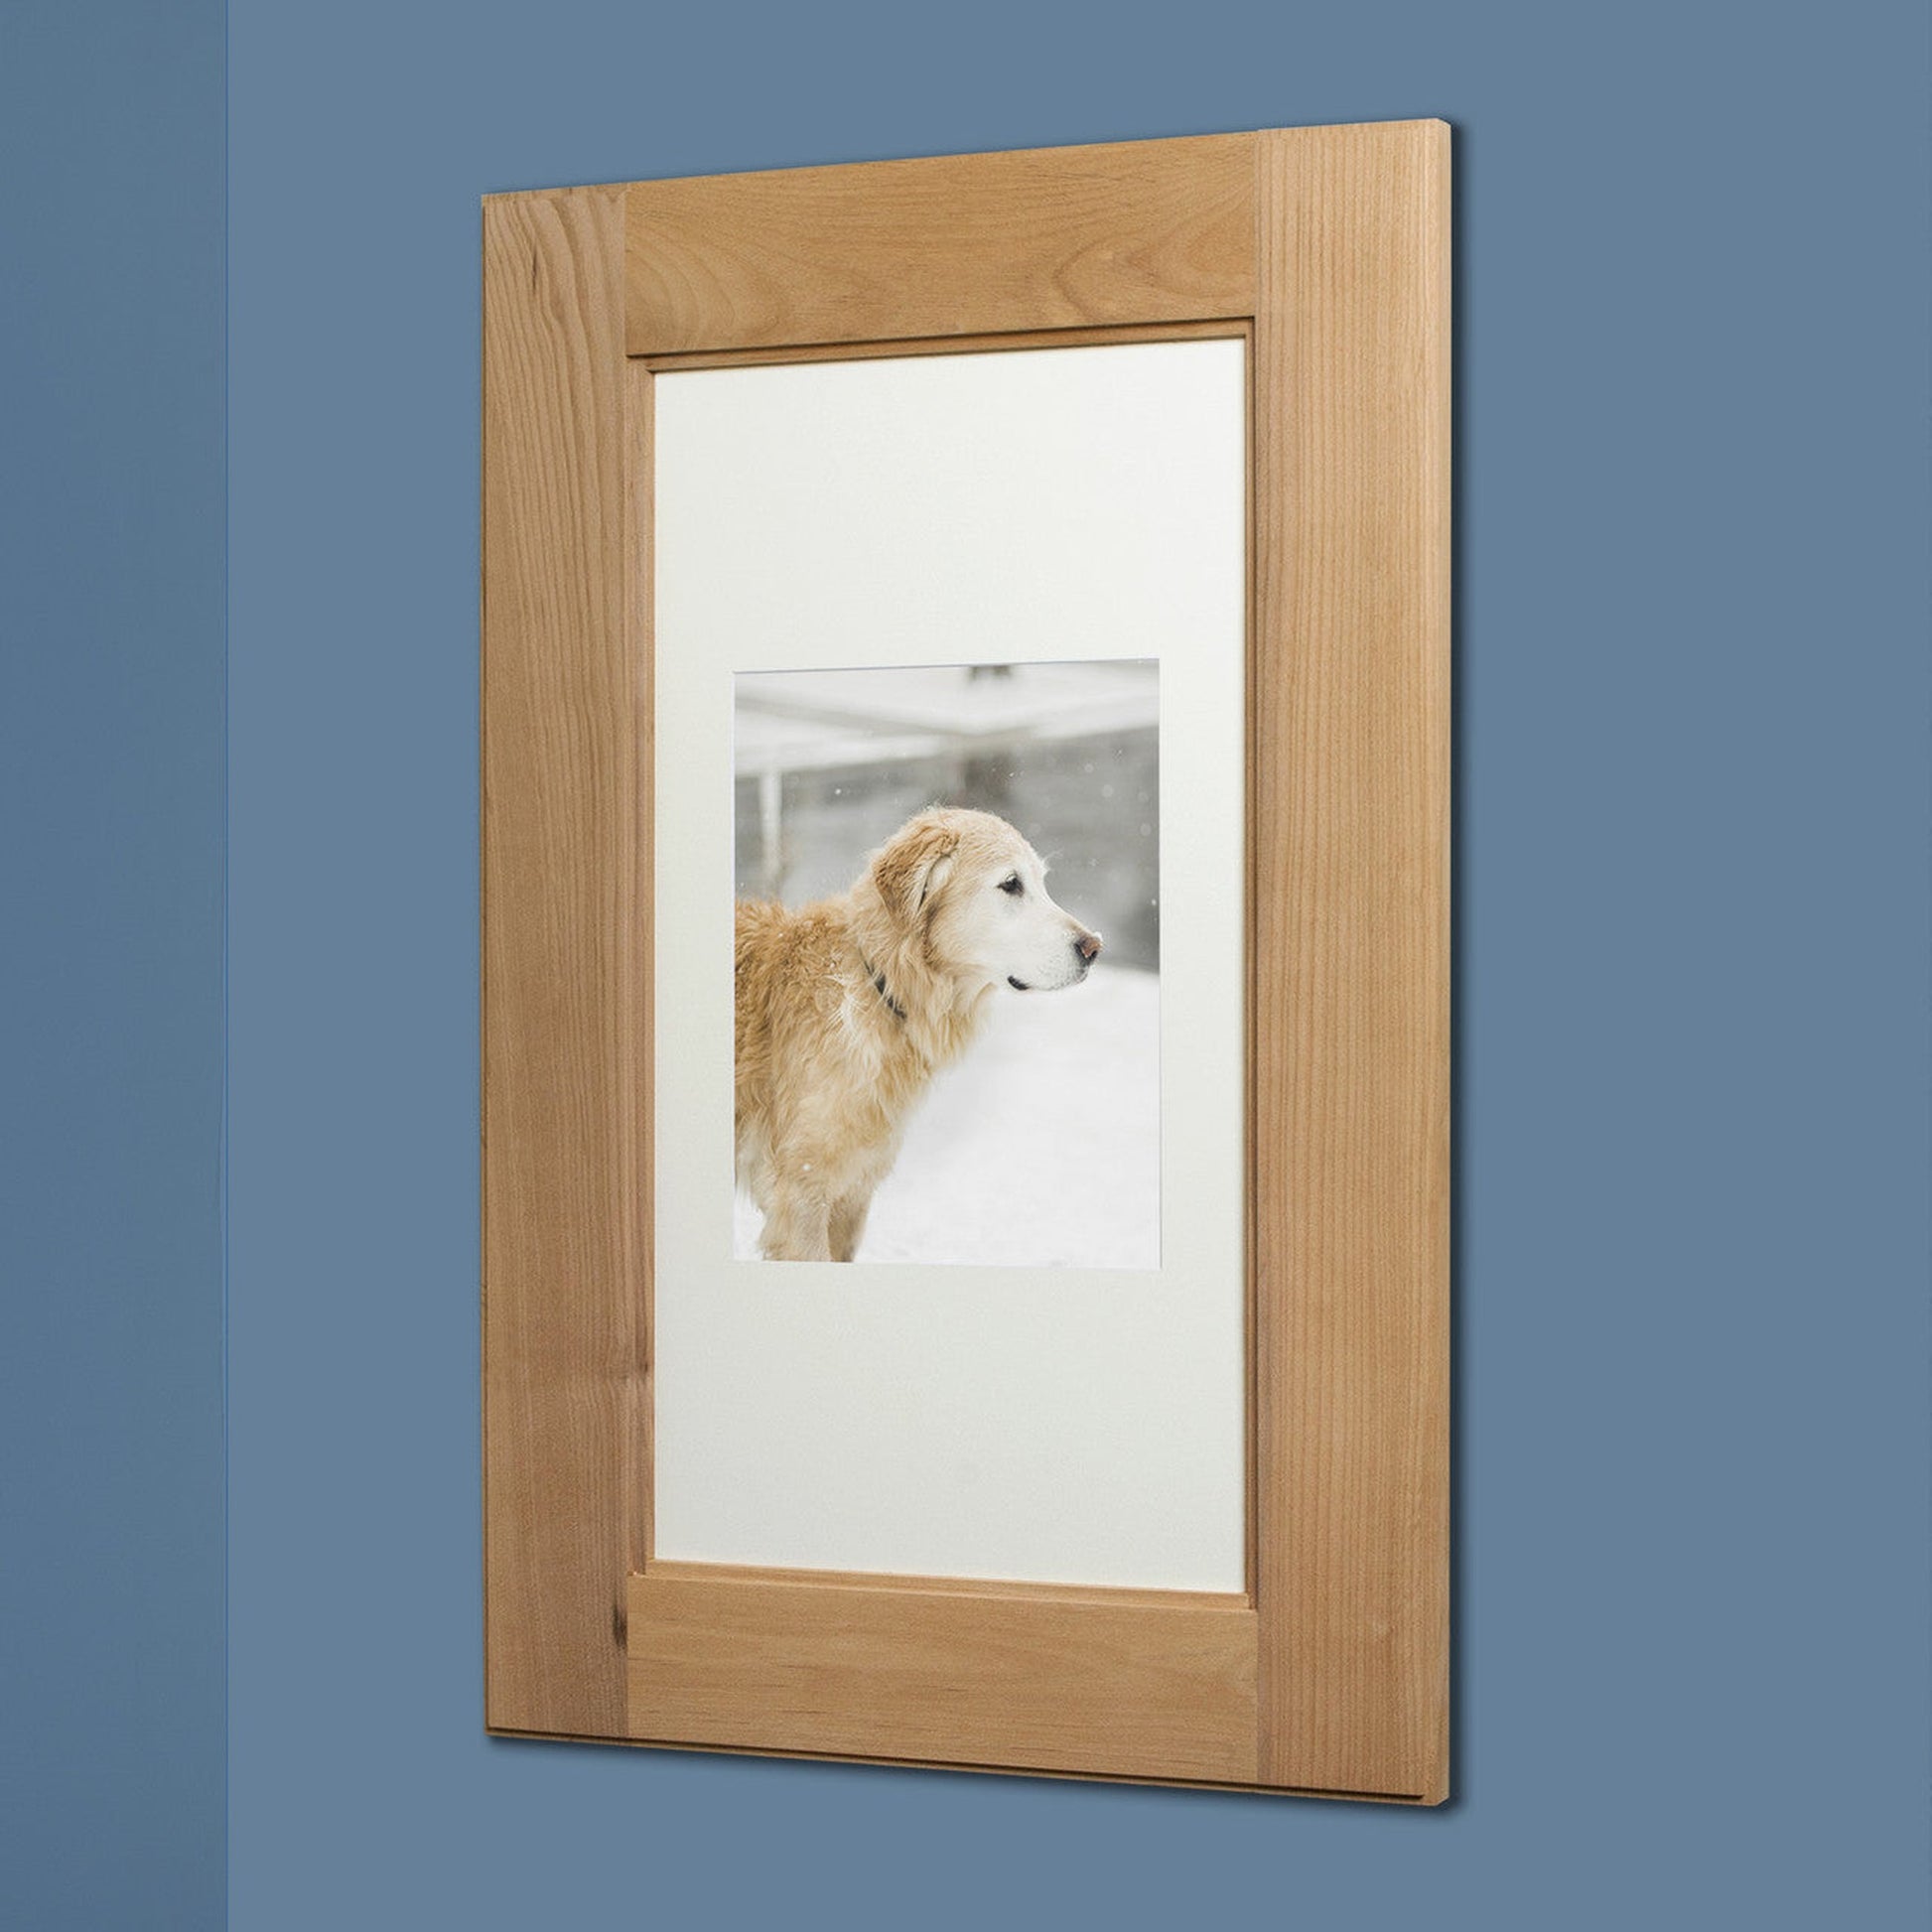 Fox Hollow Furnishings 14" x 24" Extra Large Unfinished Special 3" Depth White Interior Recessed Picture Frame Medicine Cabinet With Mirror and Ivory 8" x 10" Matting